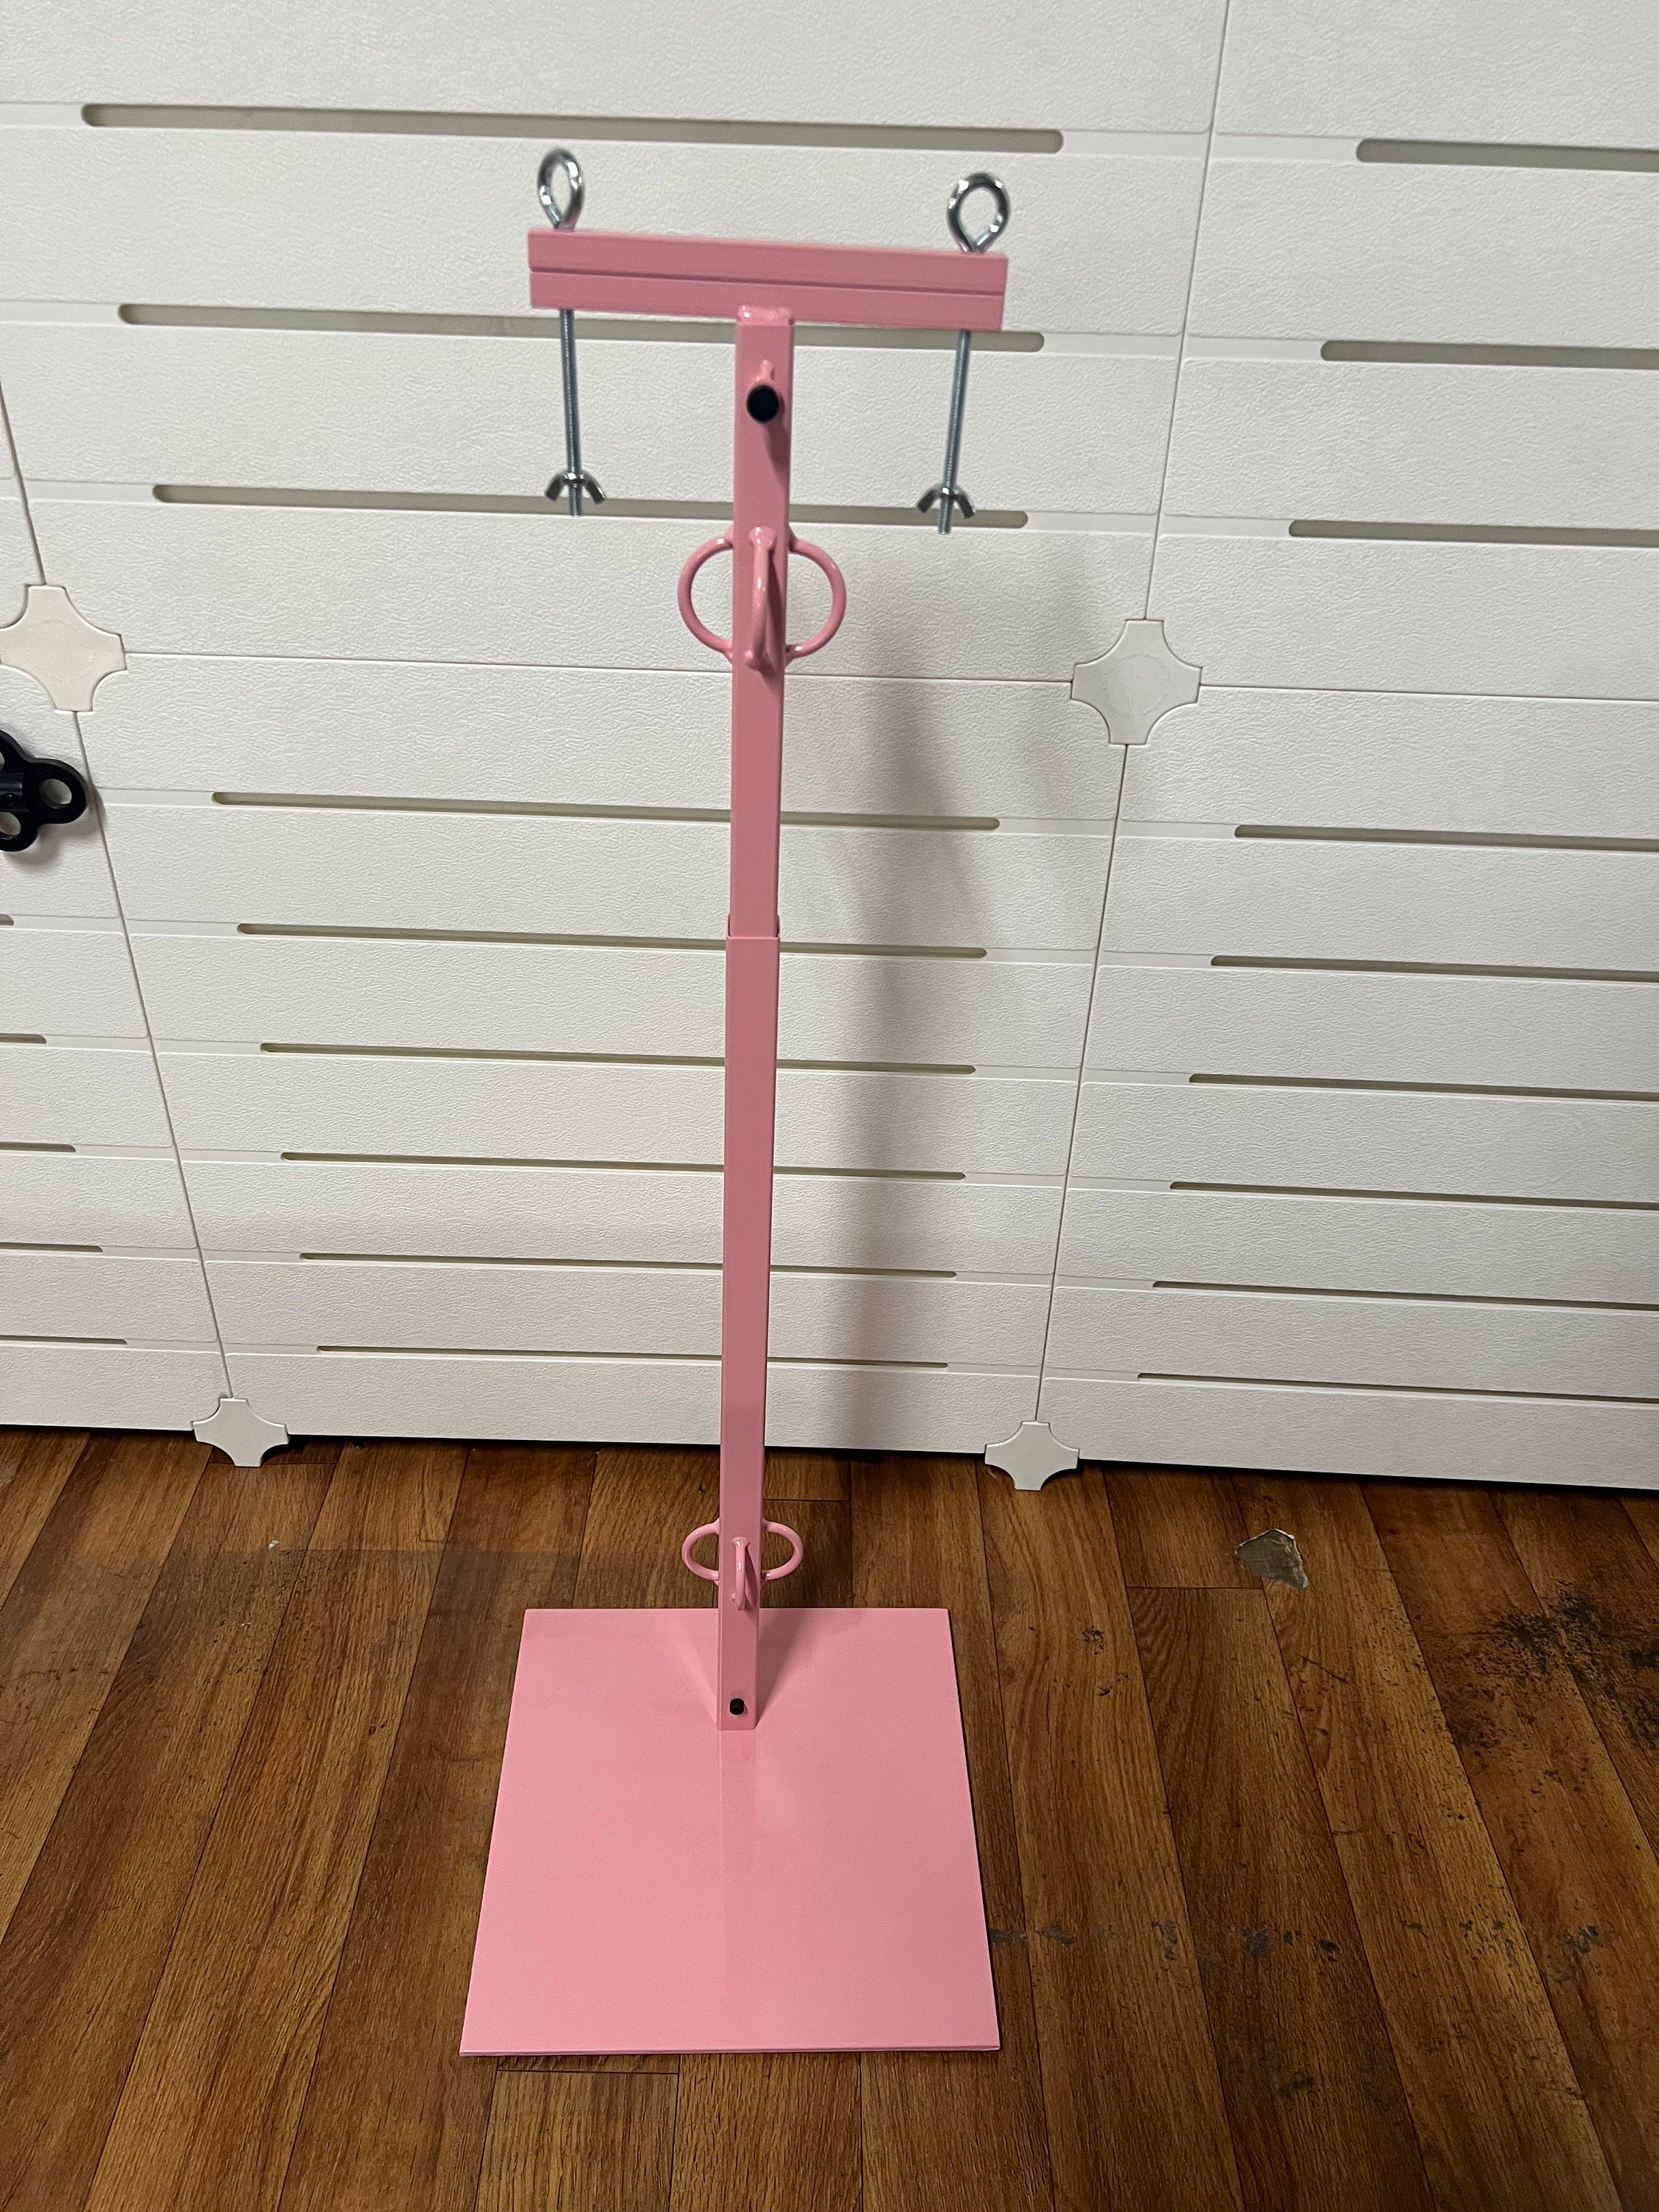 Pretty in Pink Cock and Ball Pillory Stand CBT Clamp BDSM